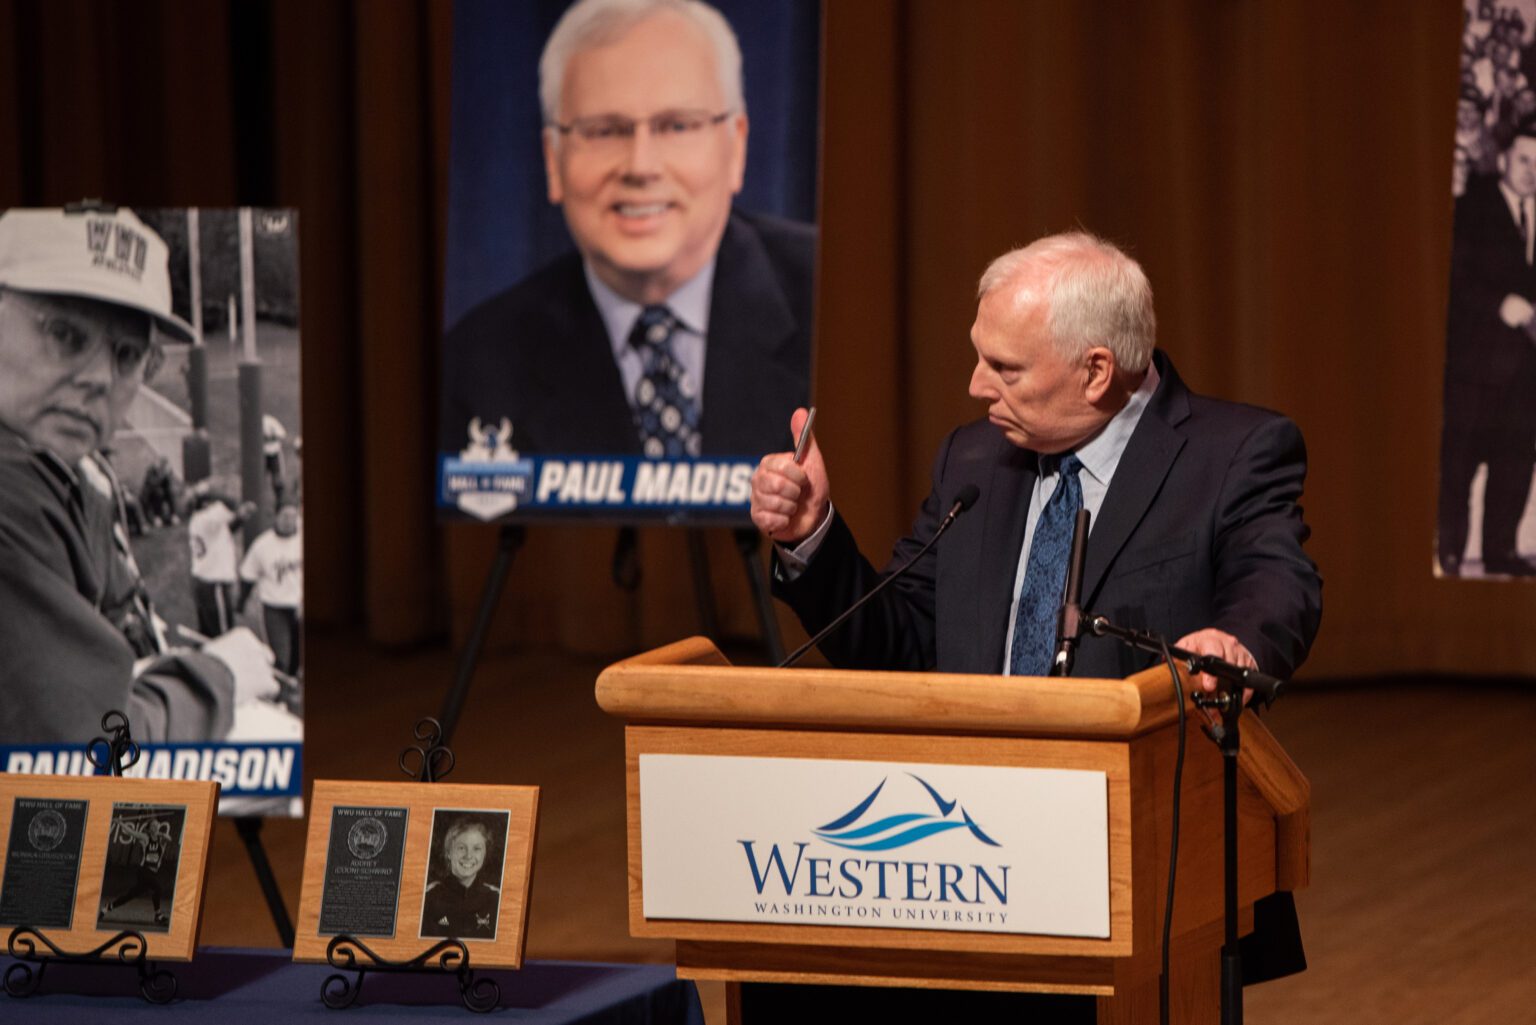 Paul Madison gives a thumbs up on Feb. 11 while addressing the audience at Western Washington University Athletics' 2023 Hall of Fame induction ceremony. Madison spent 48 years as Western's sports information director. After retiring in 2015